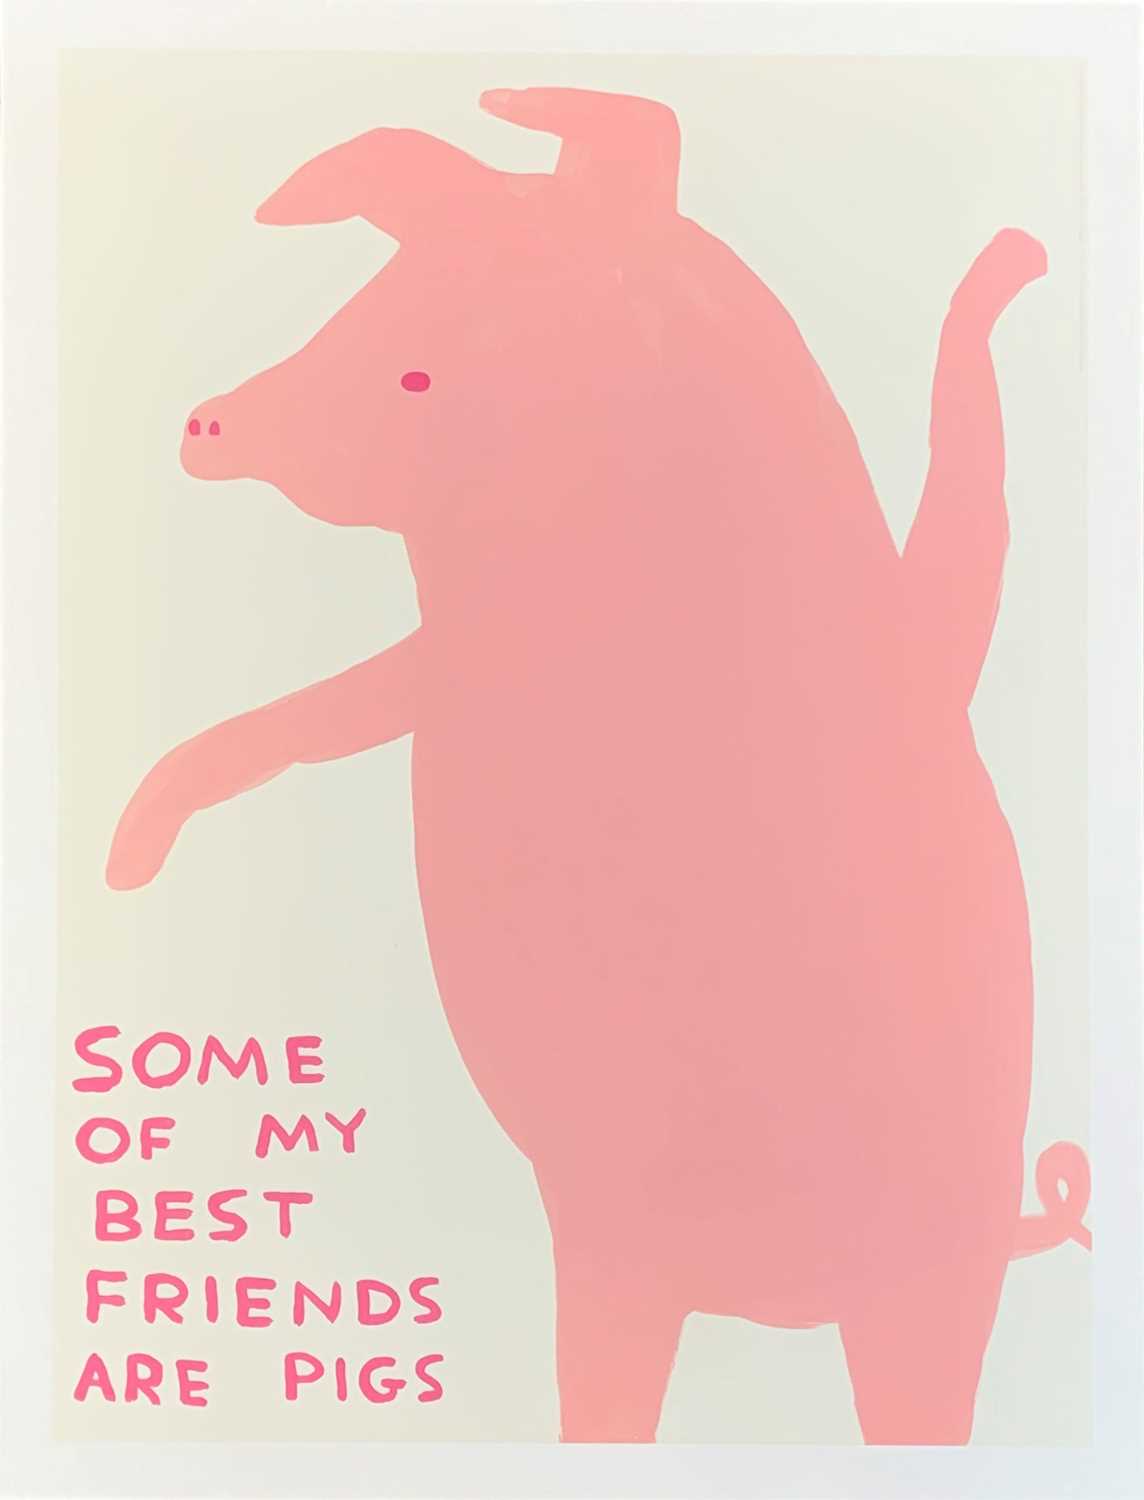 Lot 2 - David Shrigley (b.1968) Animal Posters Series: Some of My Best Friends are Pigs